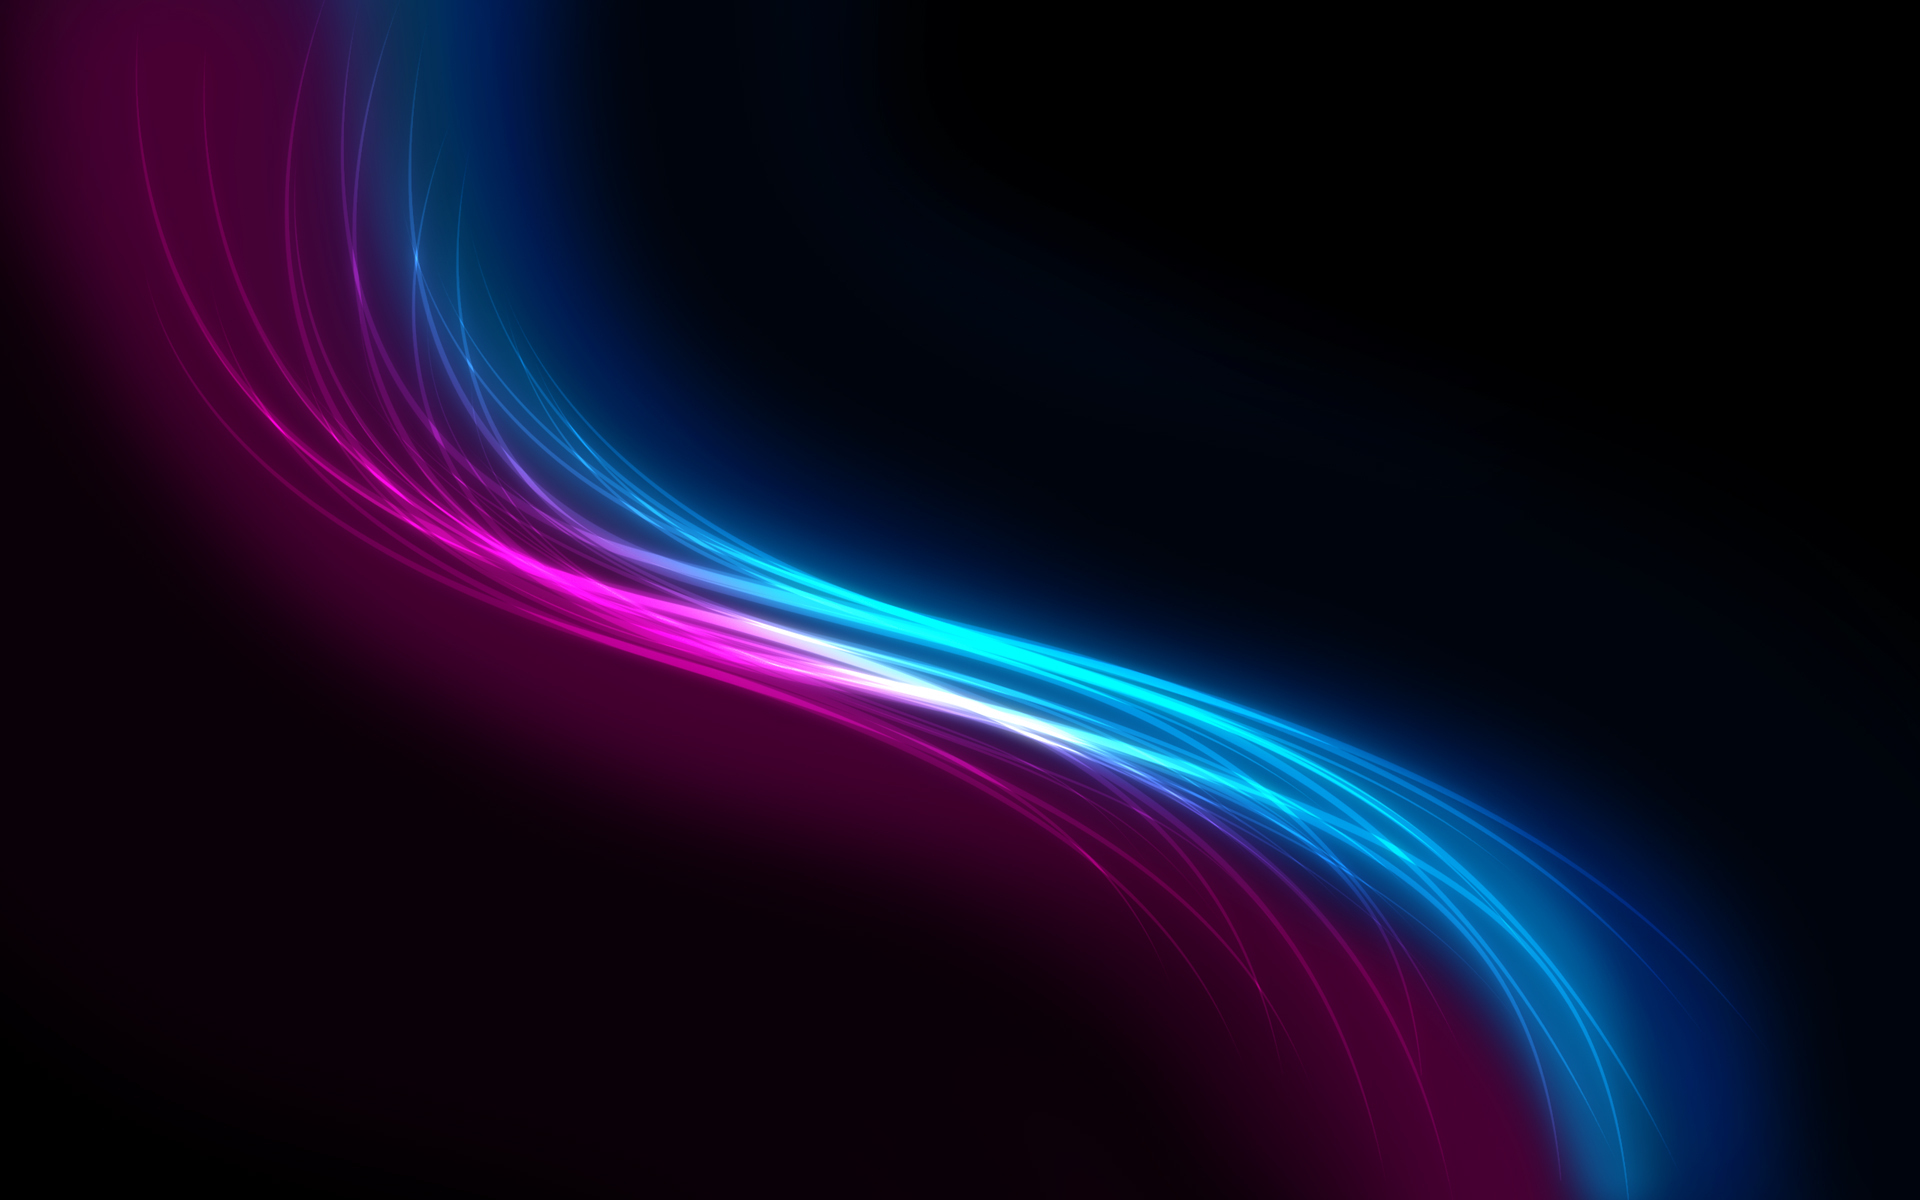 Related Pictures Background Wallpaper Image Purple Pink Swirl